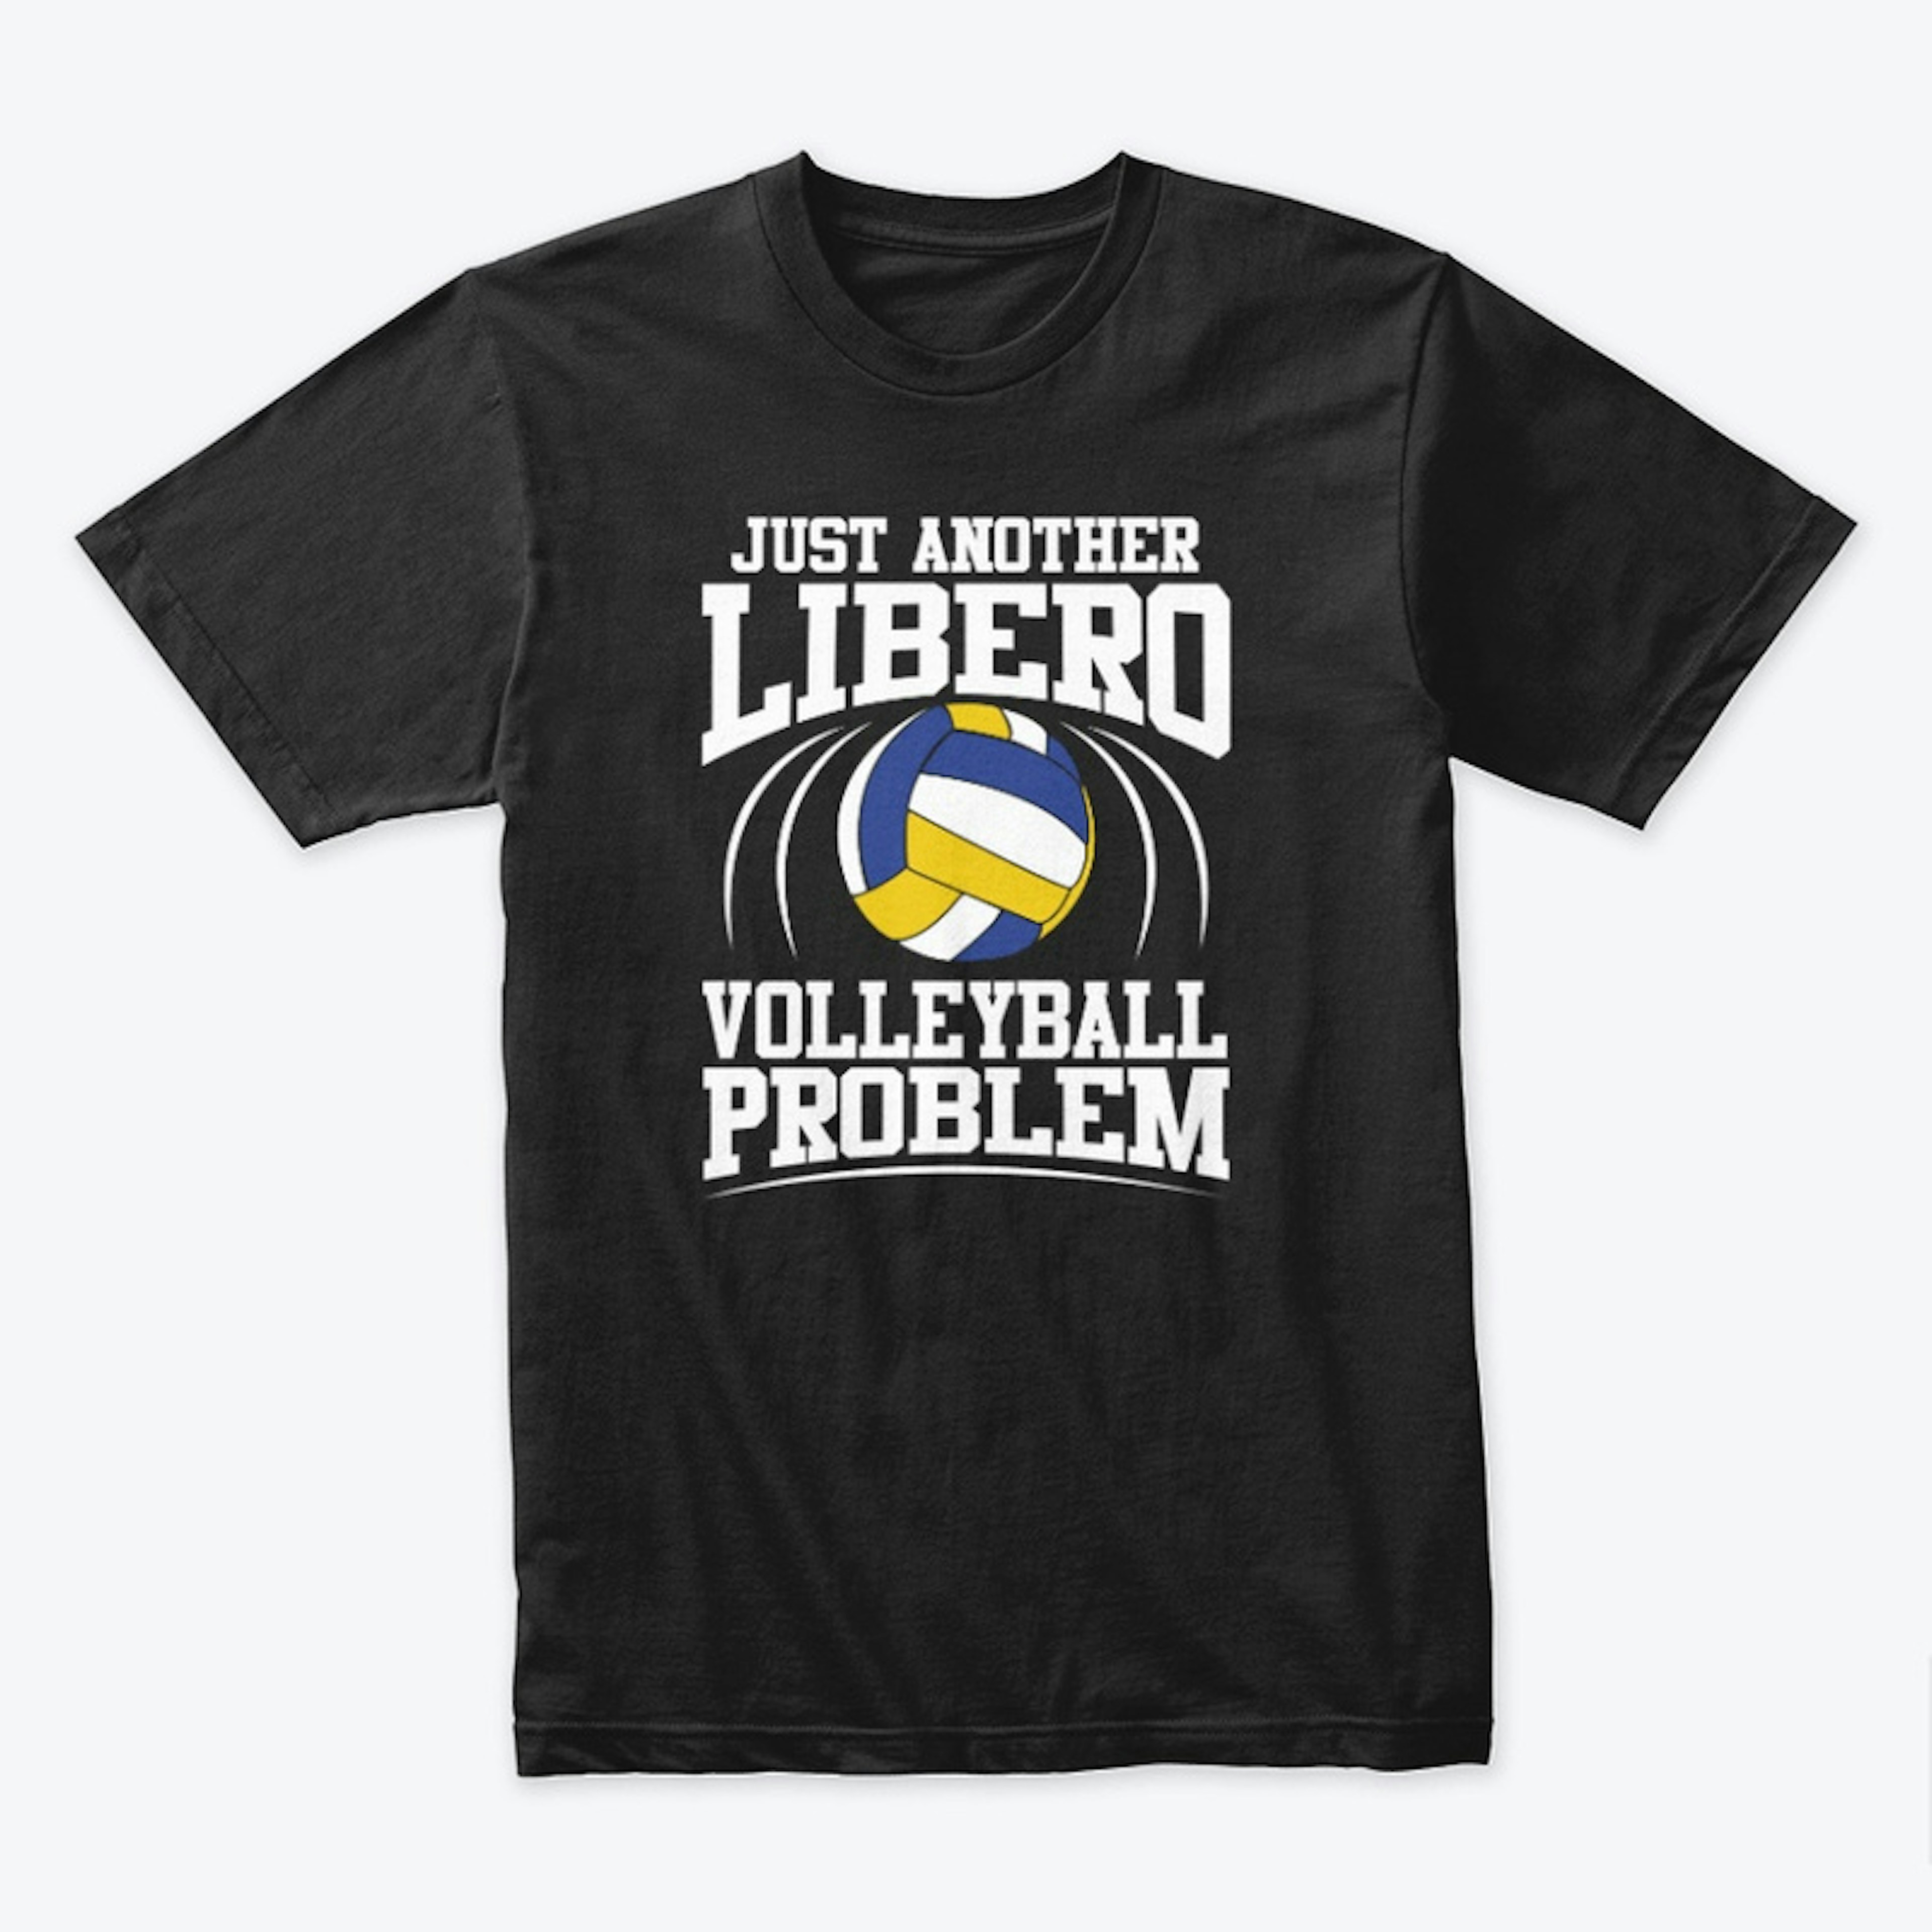 Just Another Libero Volleyball Problem